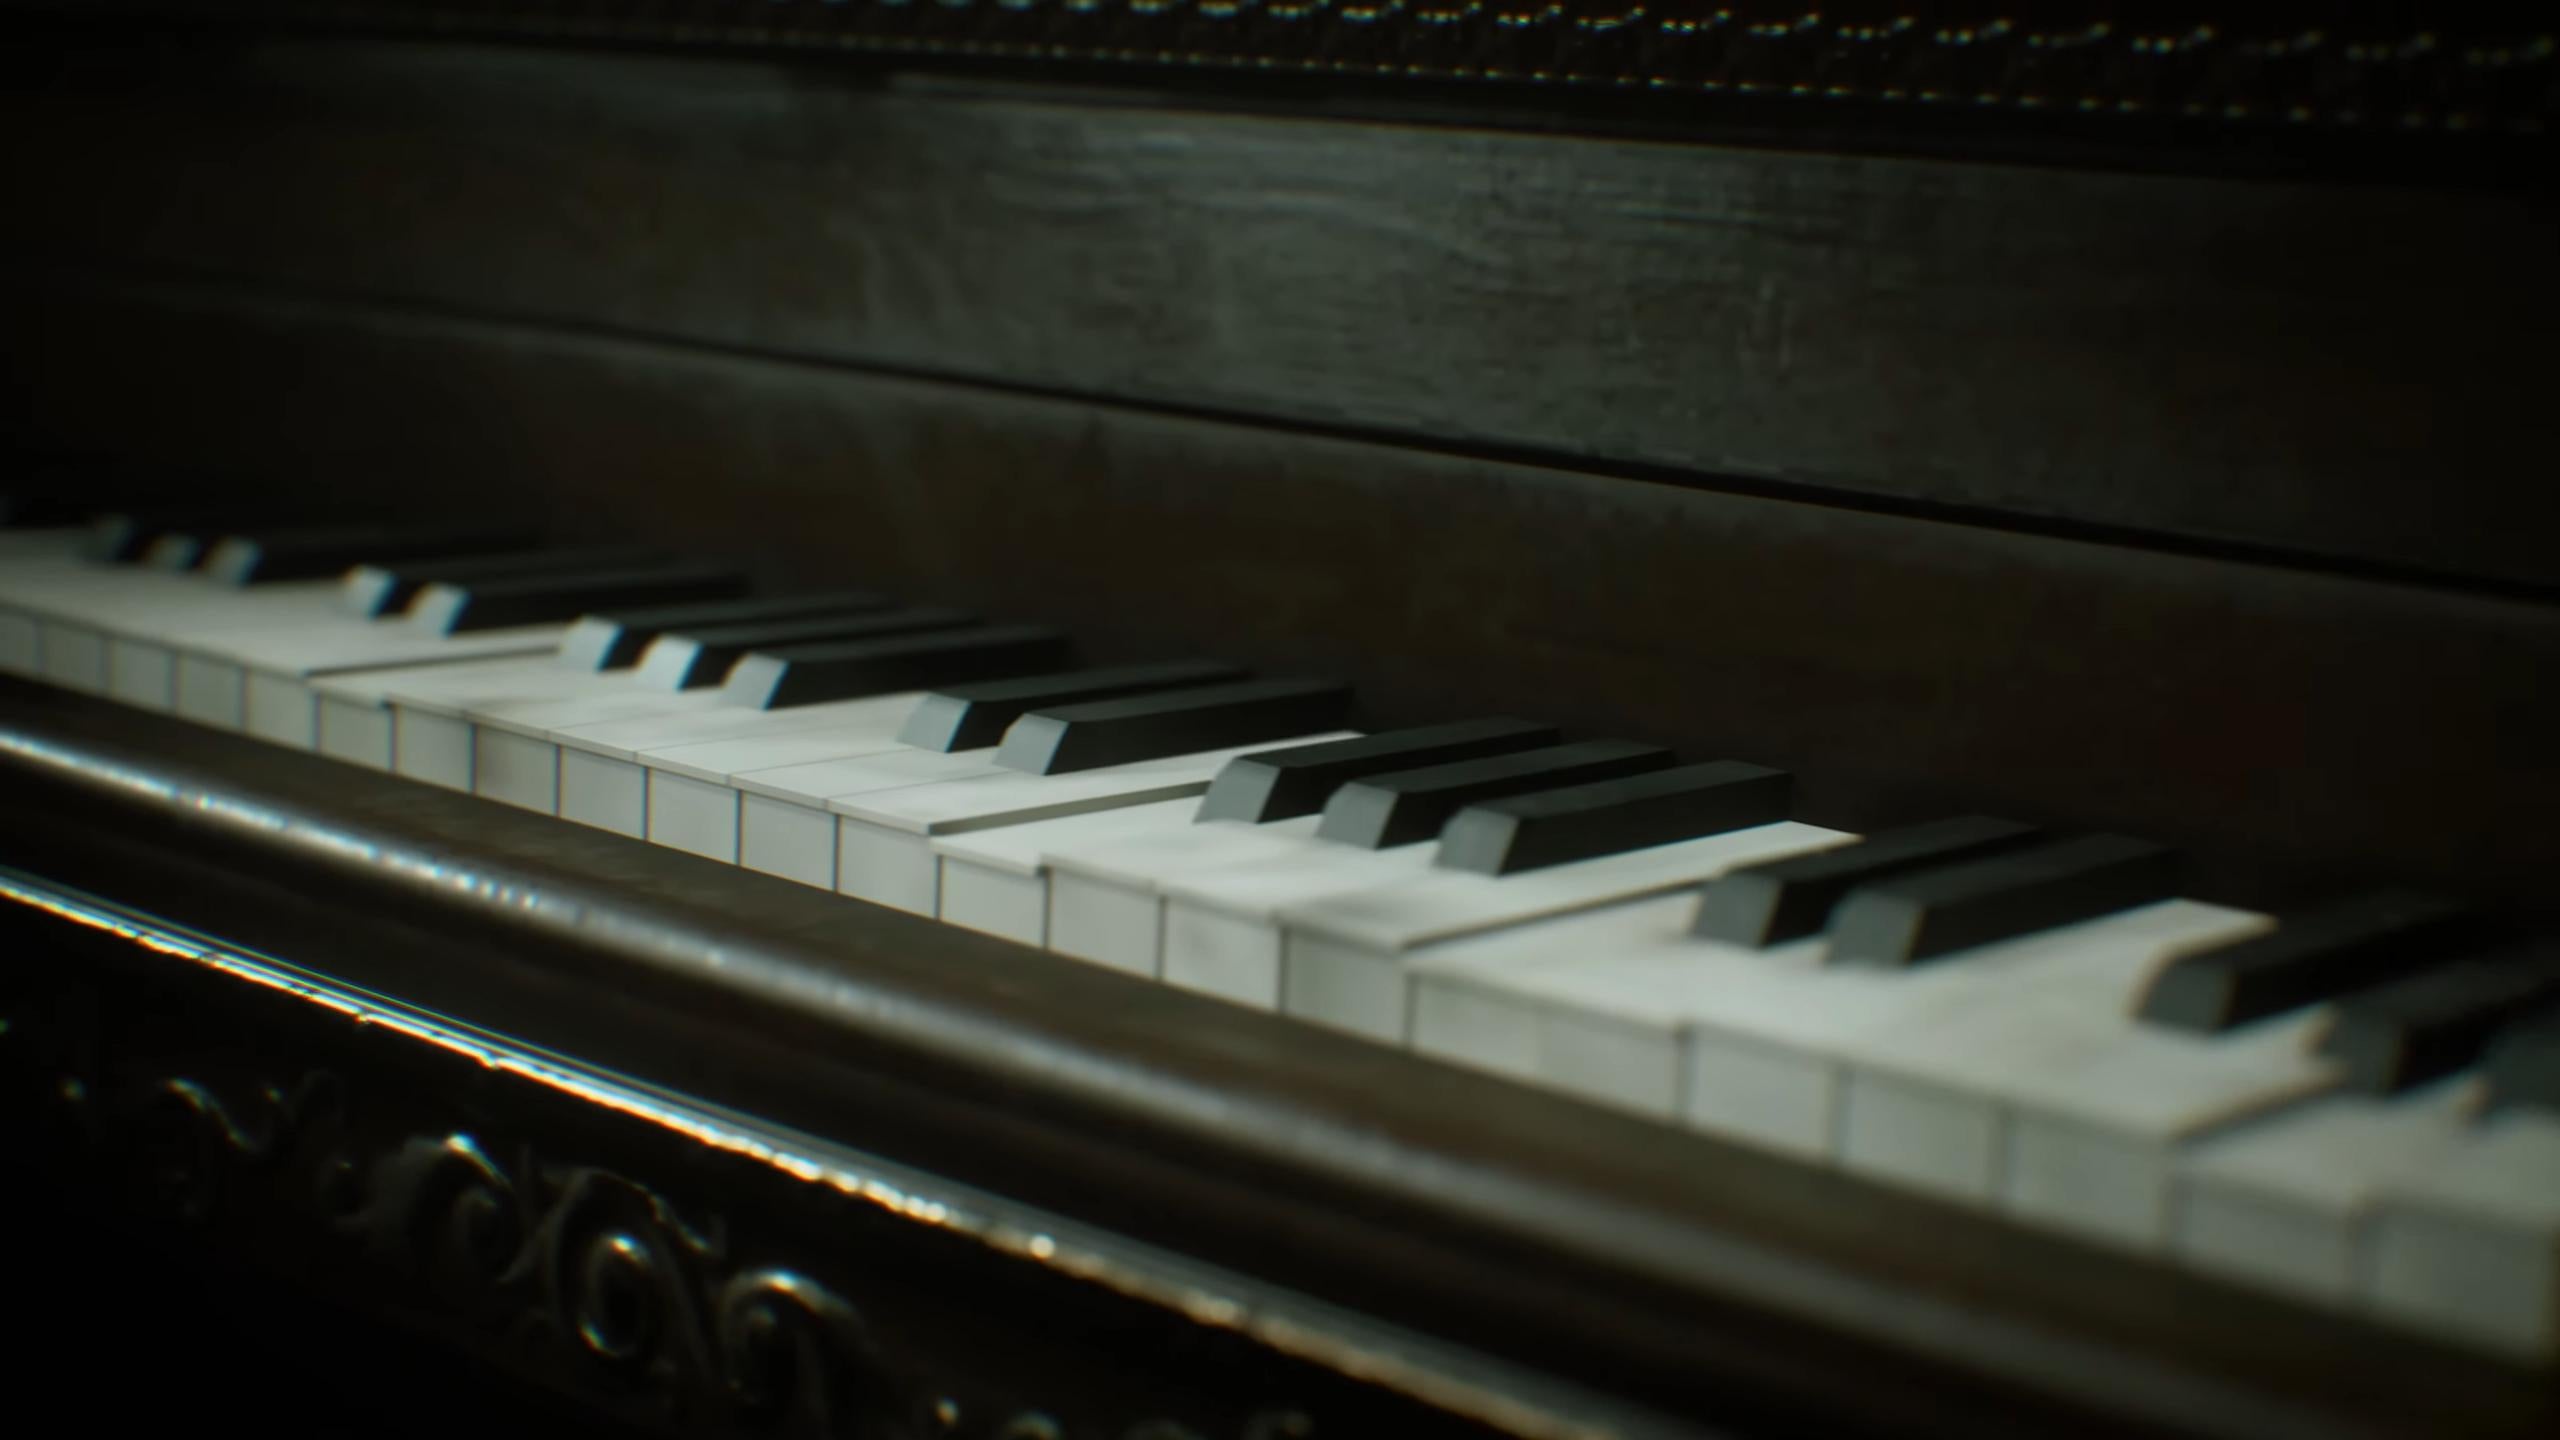 The piano from the beginning of the Gamescom Layers of Fears trailer